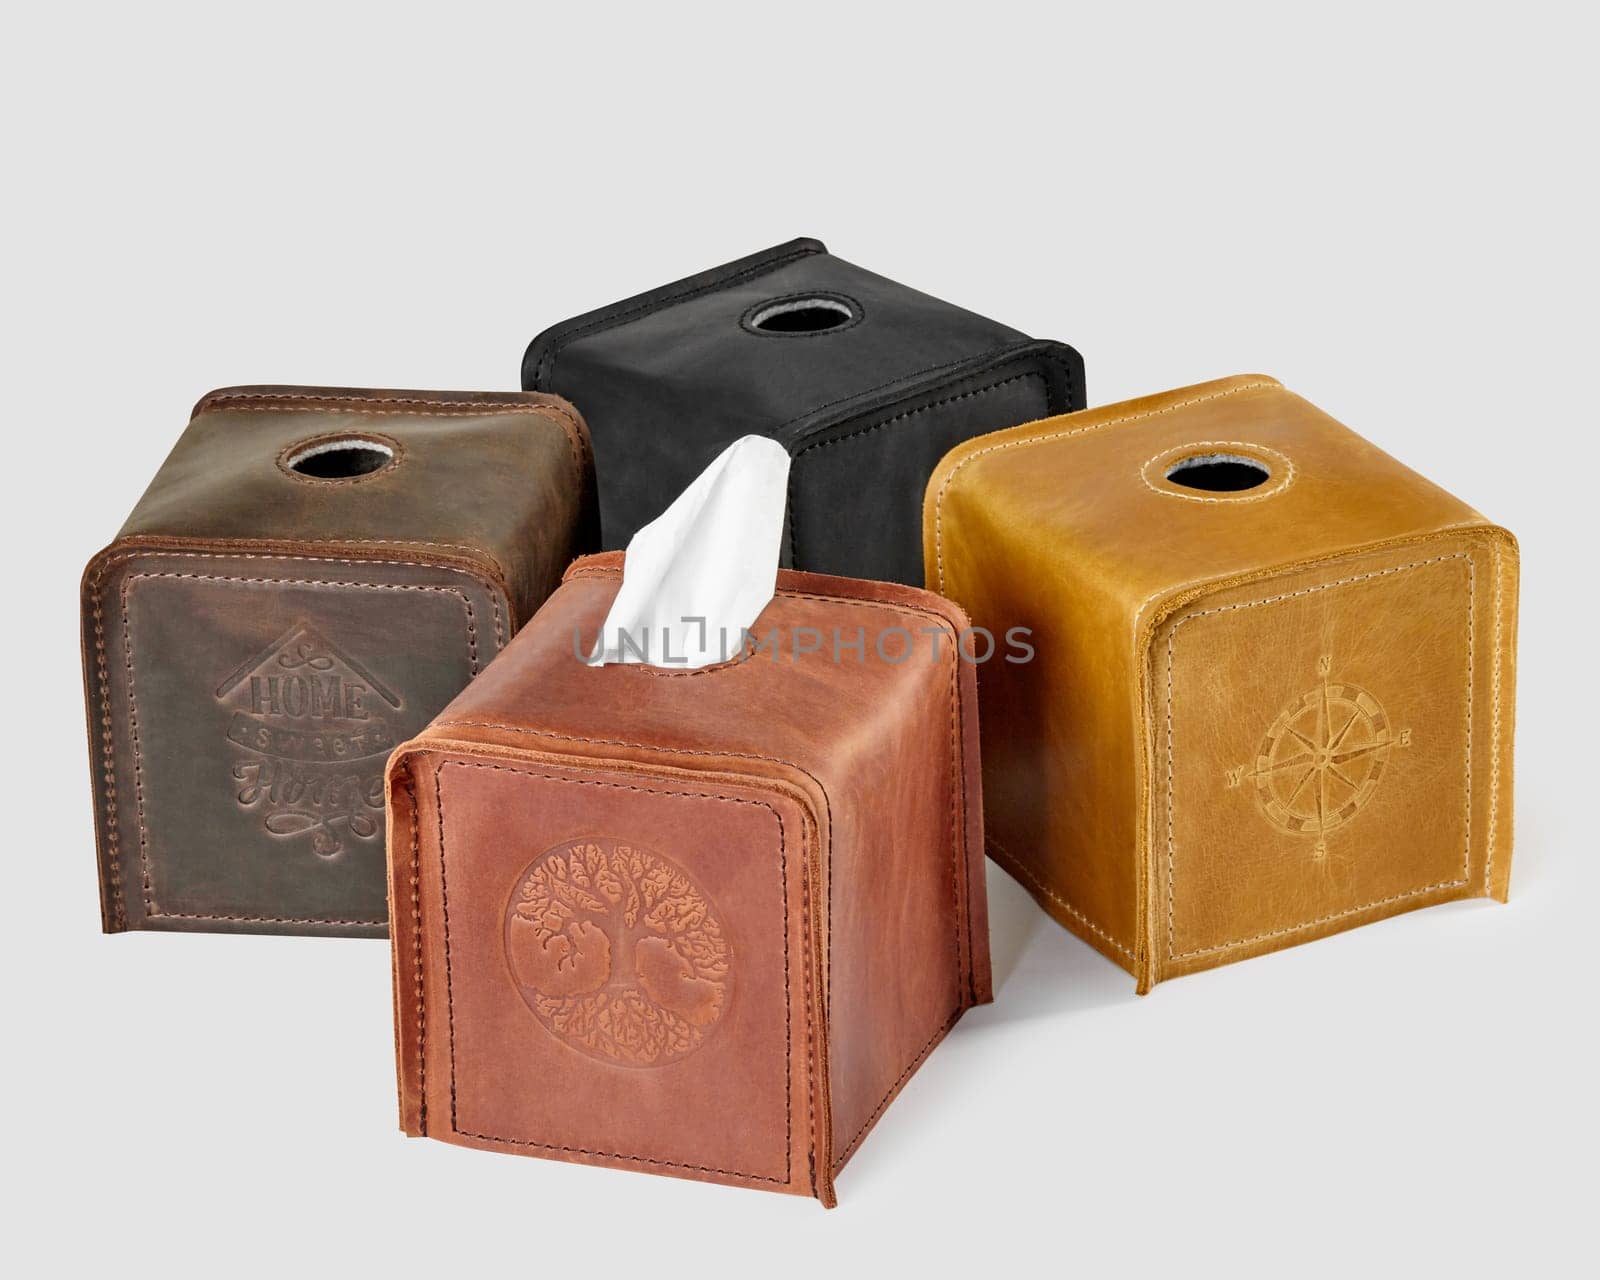 Various colored leather tissue box covers with embossed designs, isolated on white background. Stylish artisanal home decor item